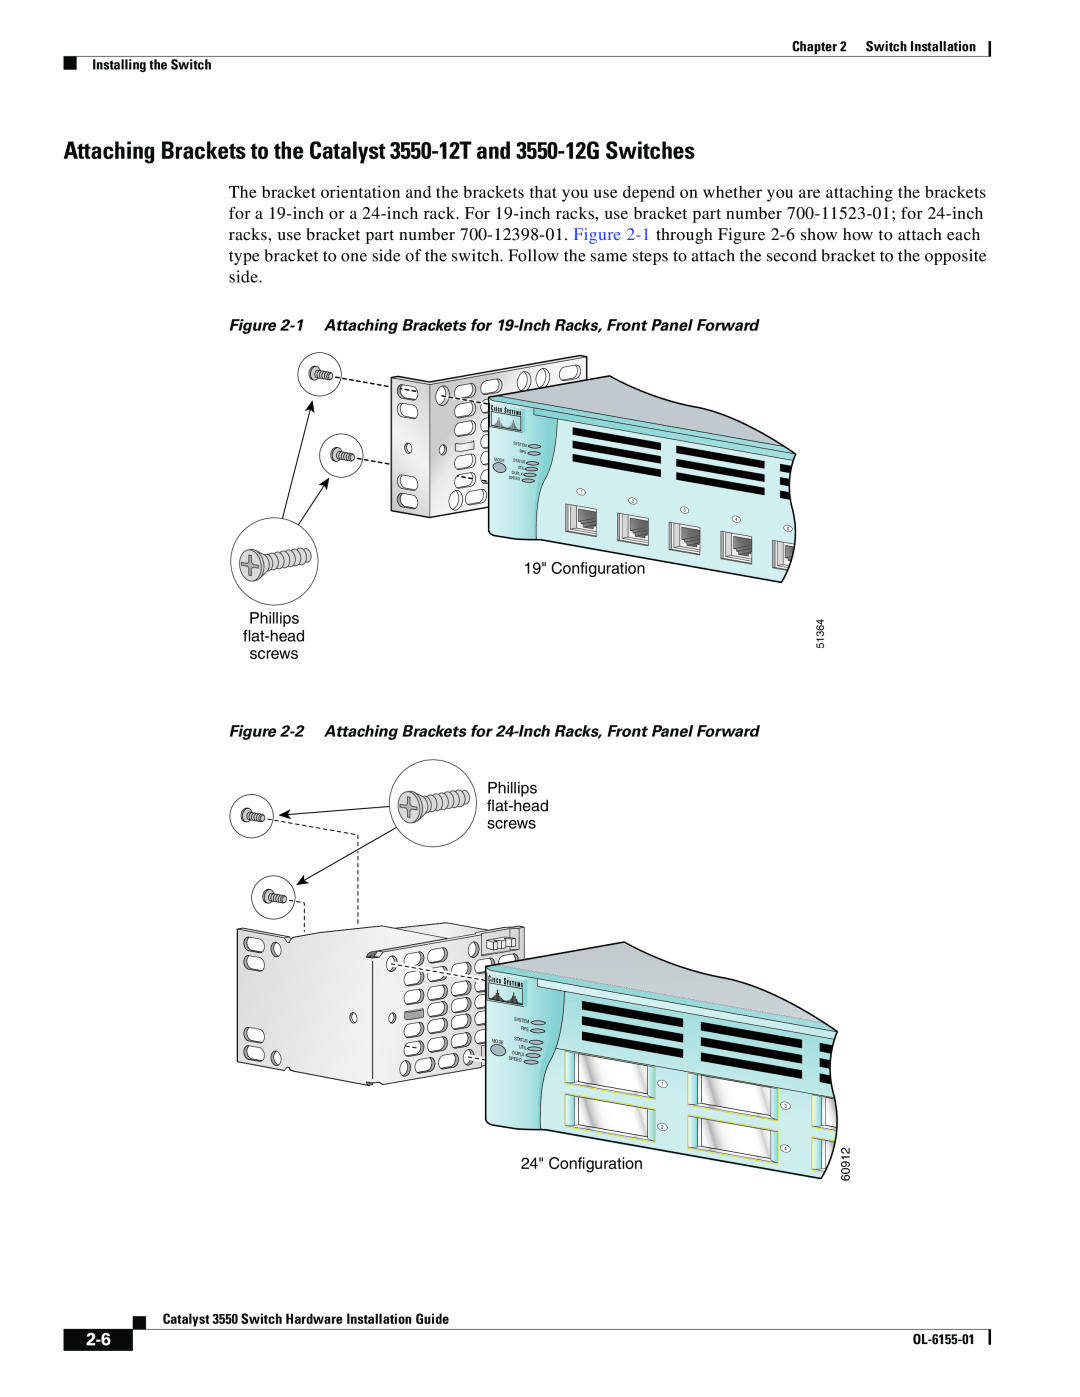 Cisco Systems manual Attaching Brackets to the Catalyst 3550-12T and 3550-12G Switches 